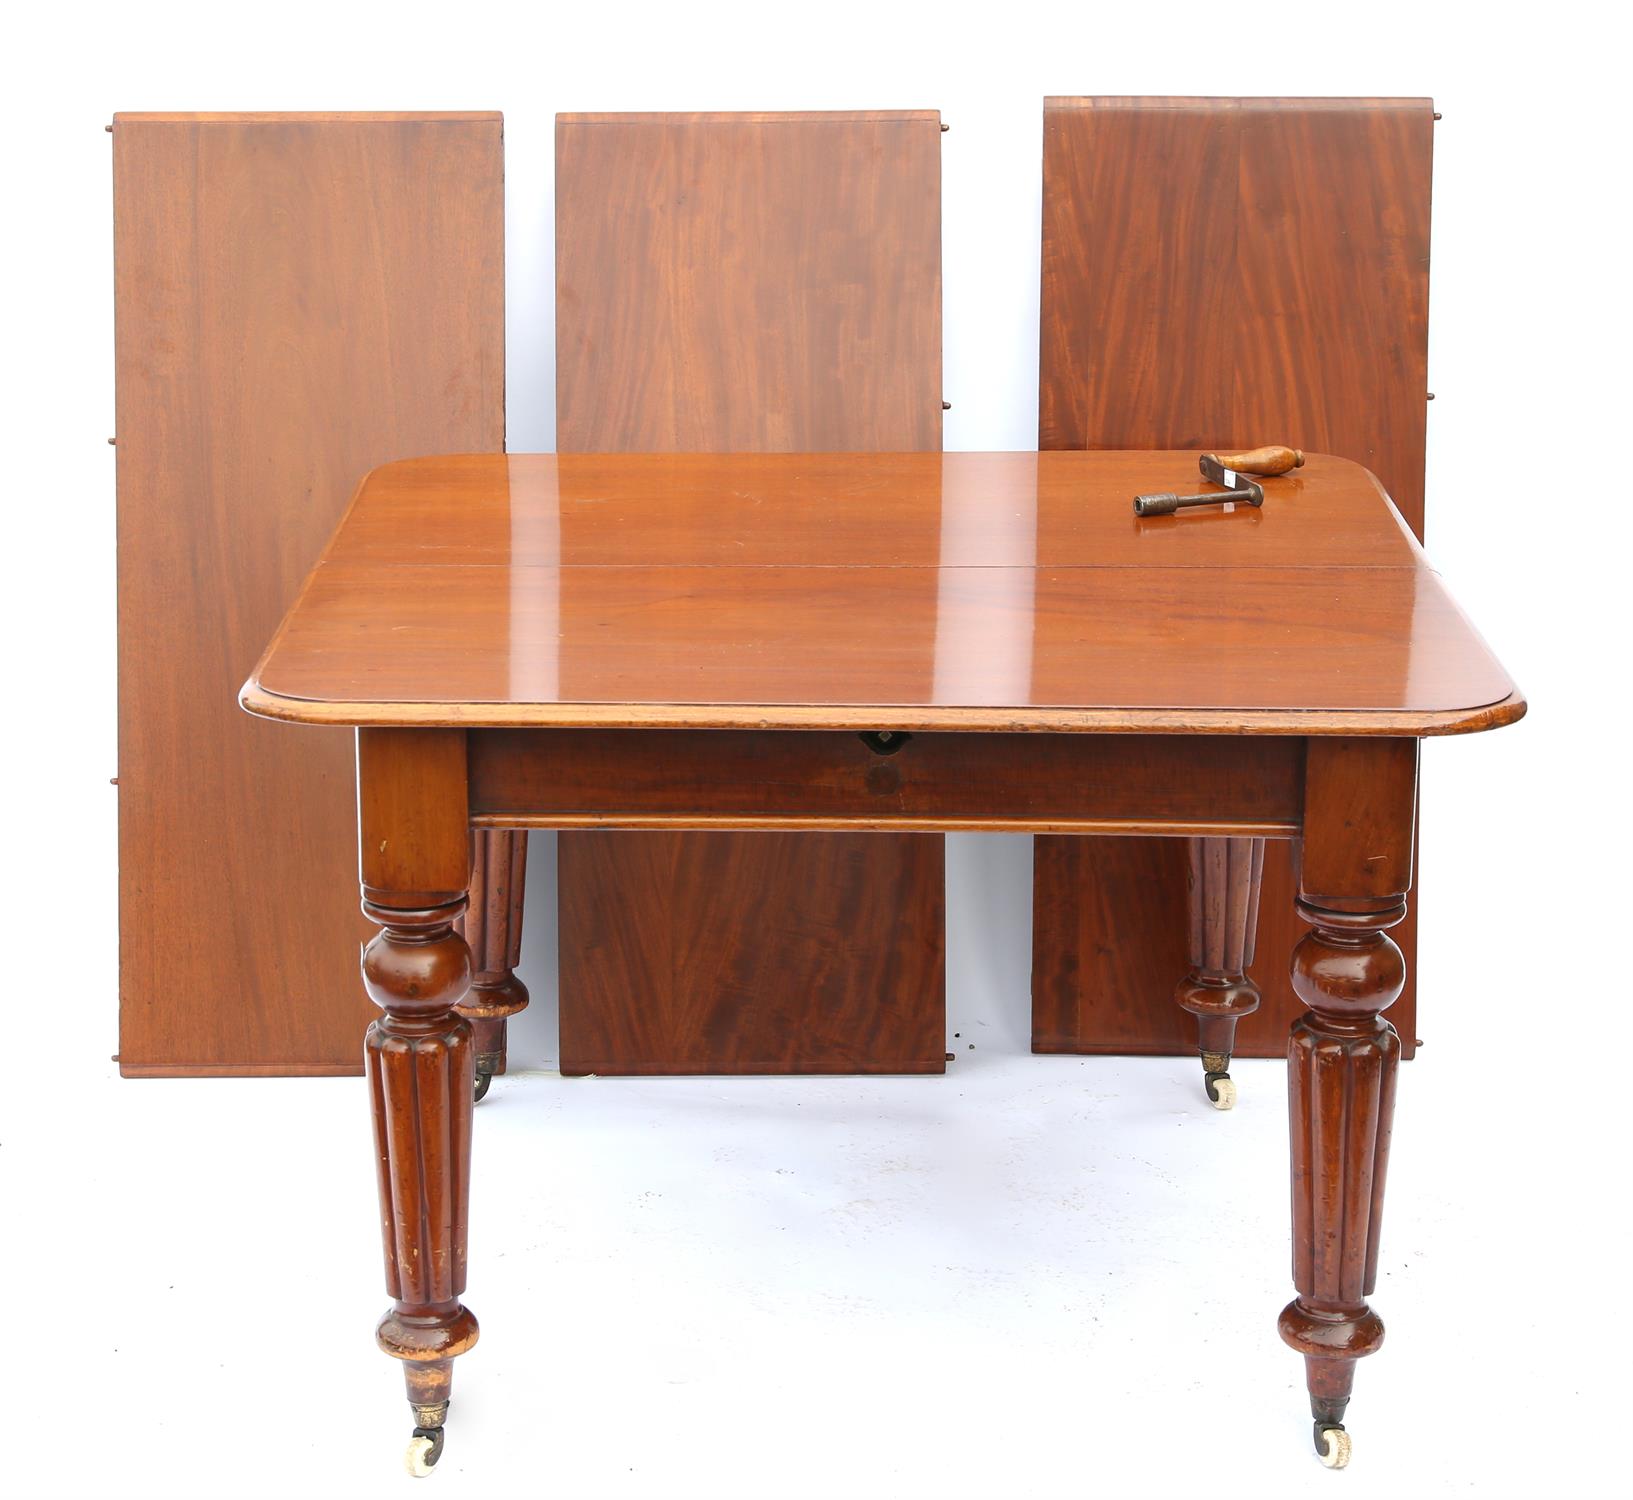 19th century mahogany extending dining table with three extra leaves, on reeded legs and castors, - Image 2 of 2